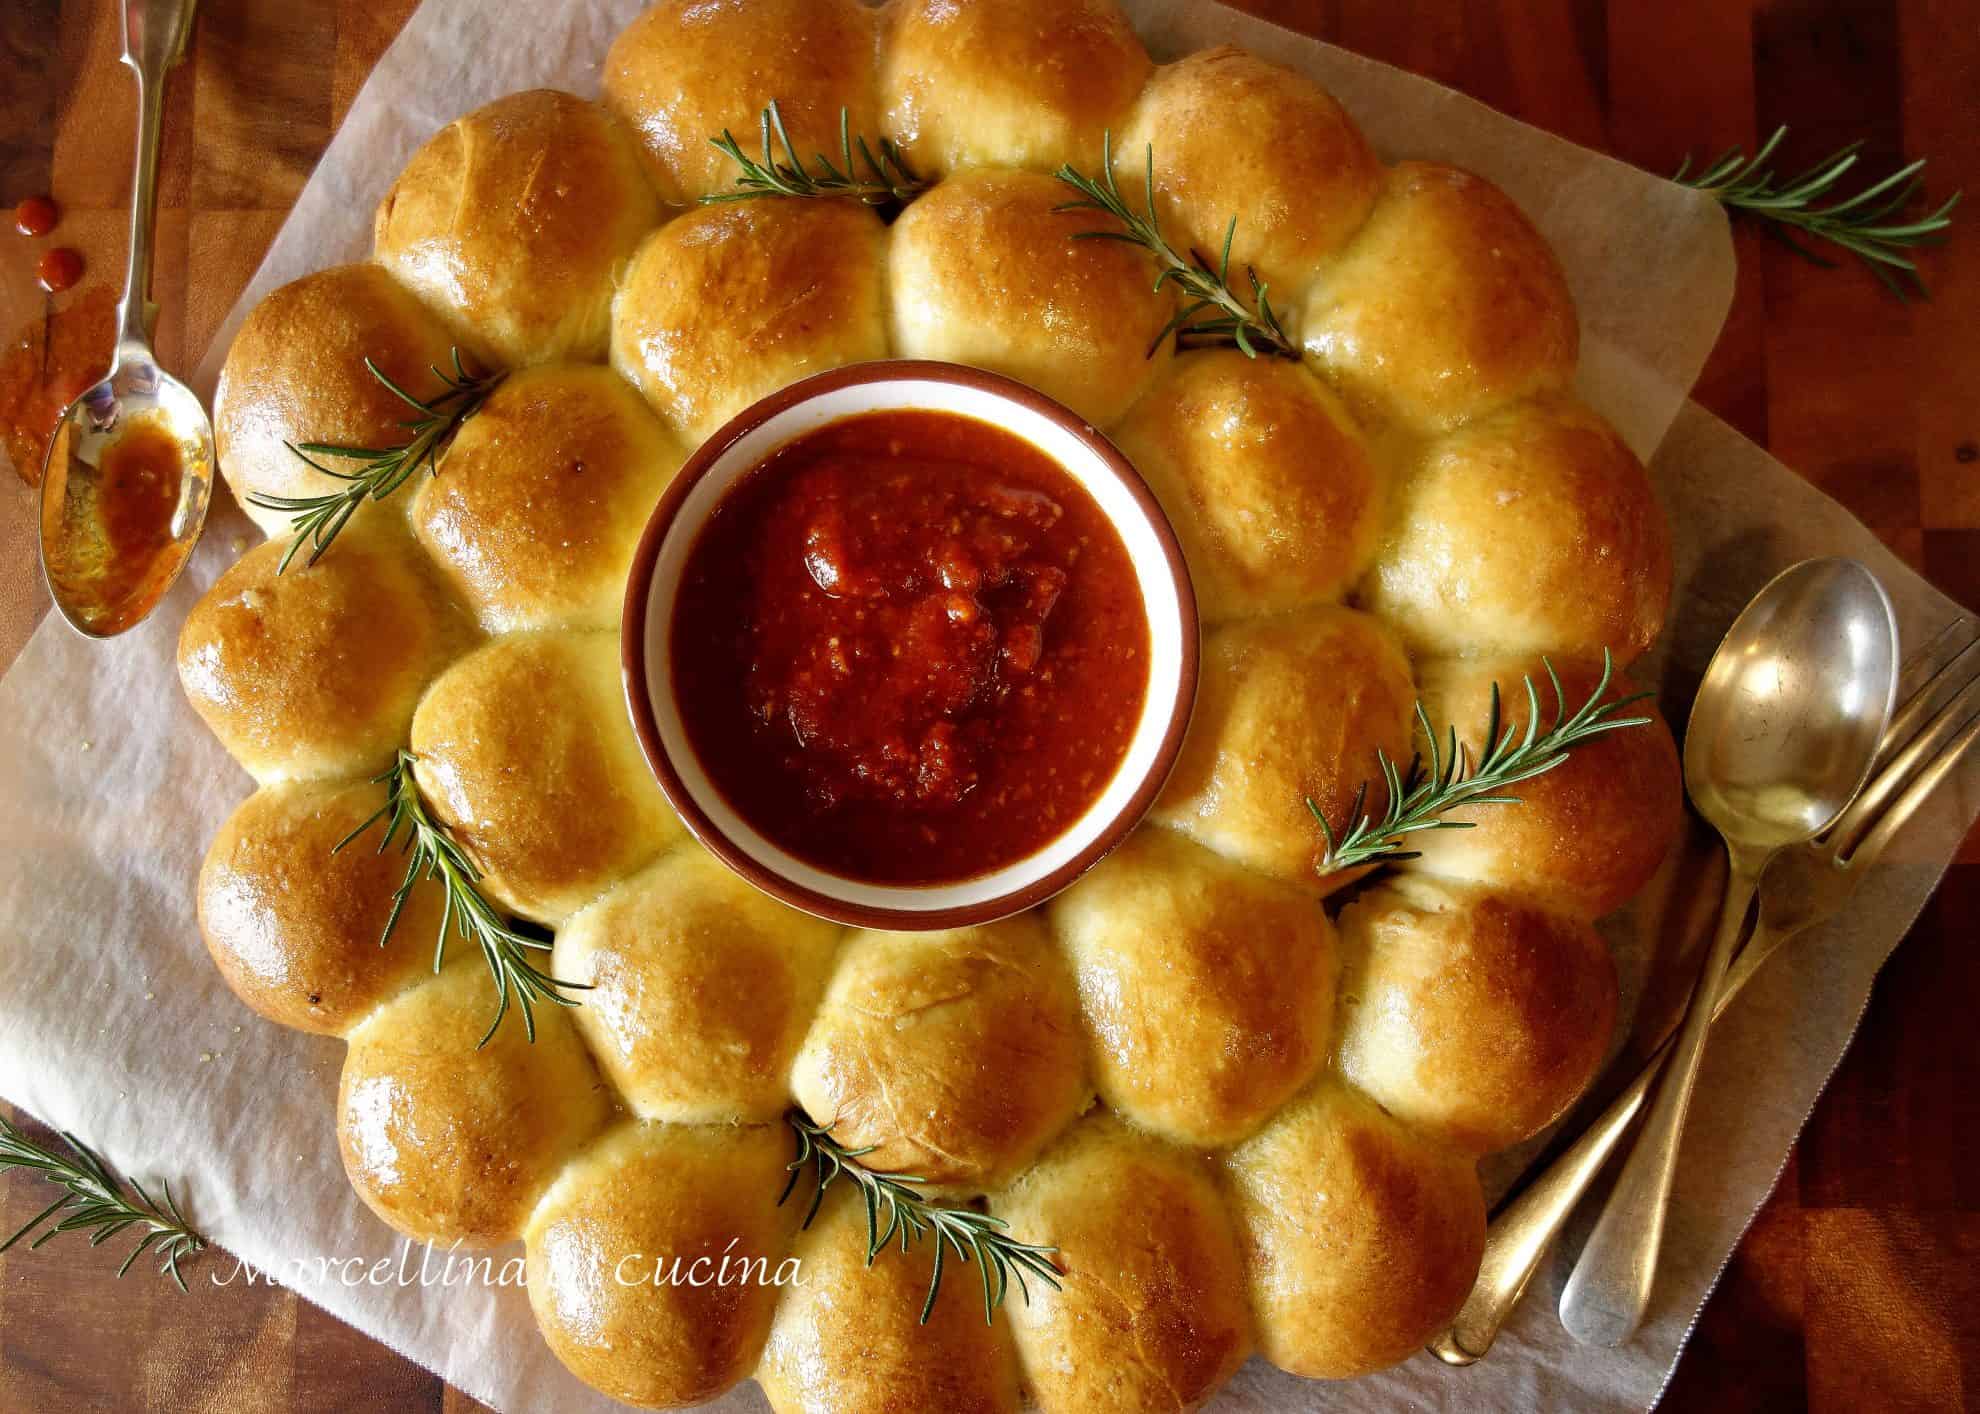 wreath made of bread with tomato dipping sauce in the middle.